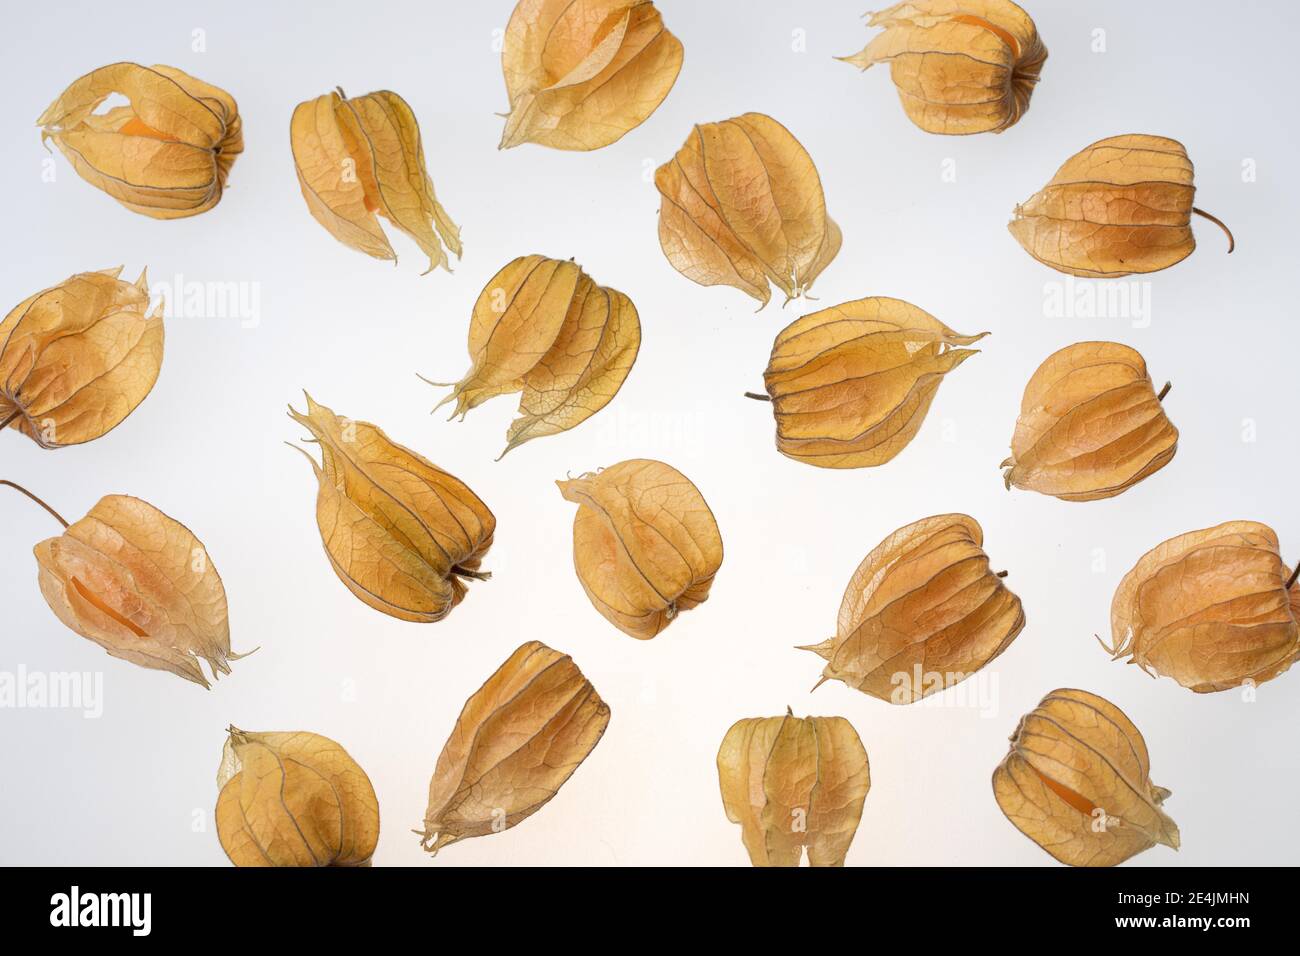 Dried physalis spread on a white background Stock Photo